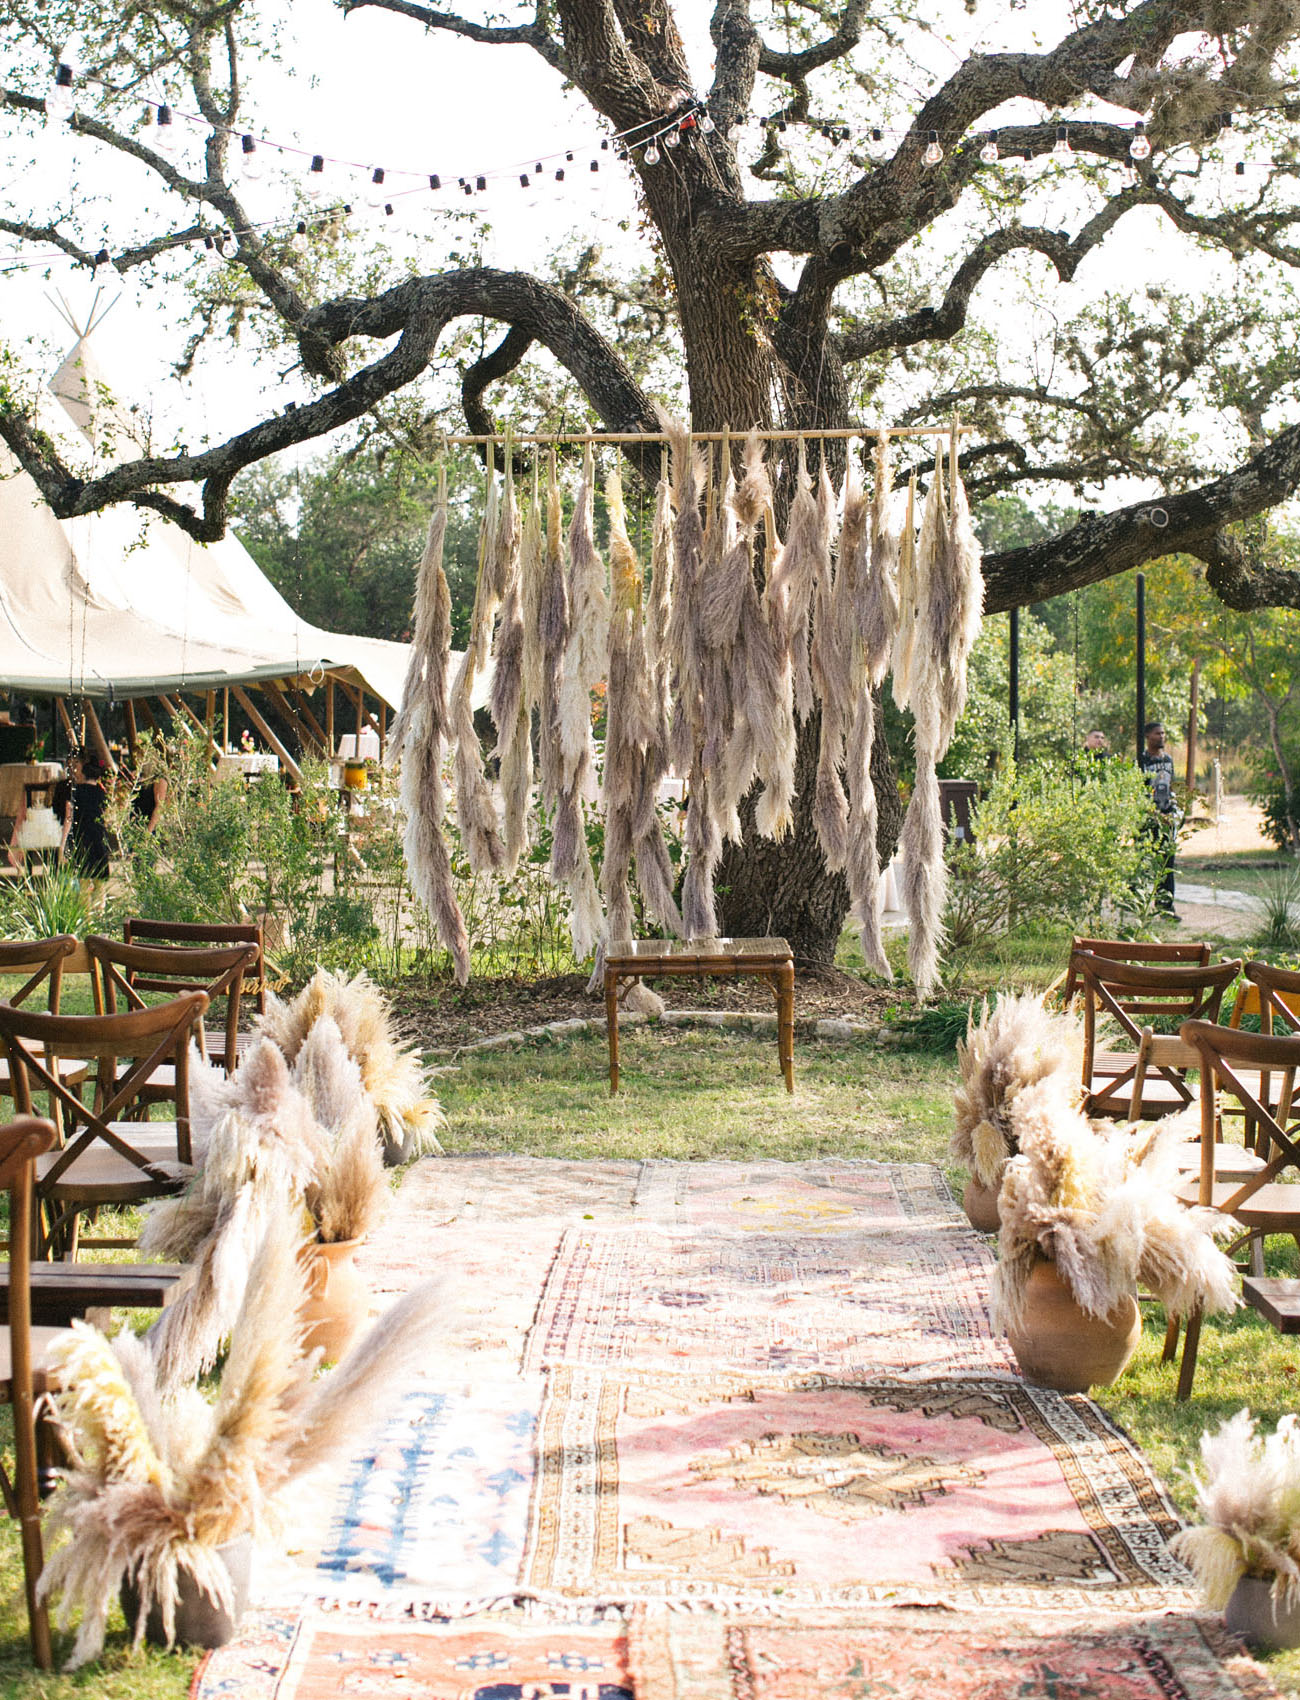 Thanks to the pampas grass, the ceremony space got a desert feel, though it was located in the garden